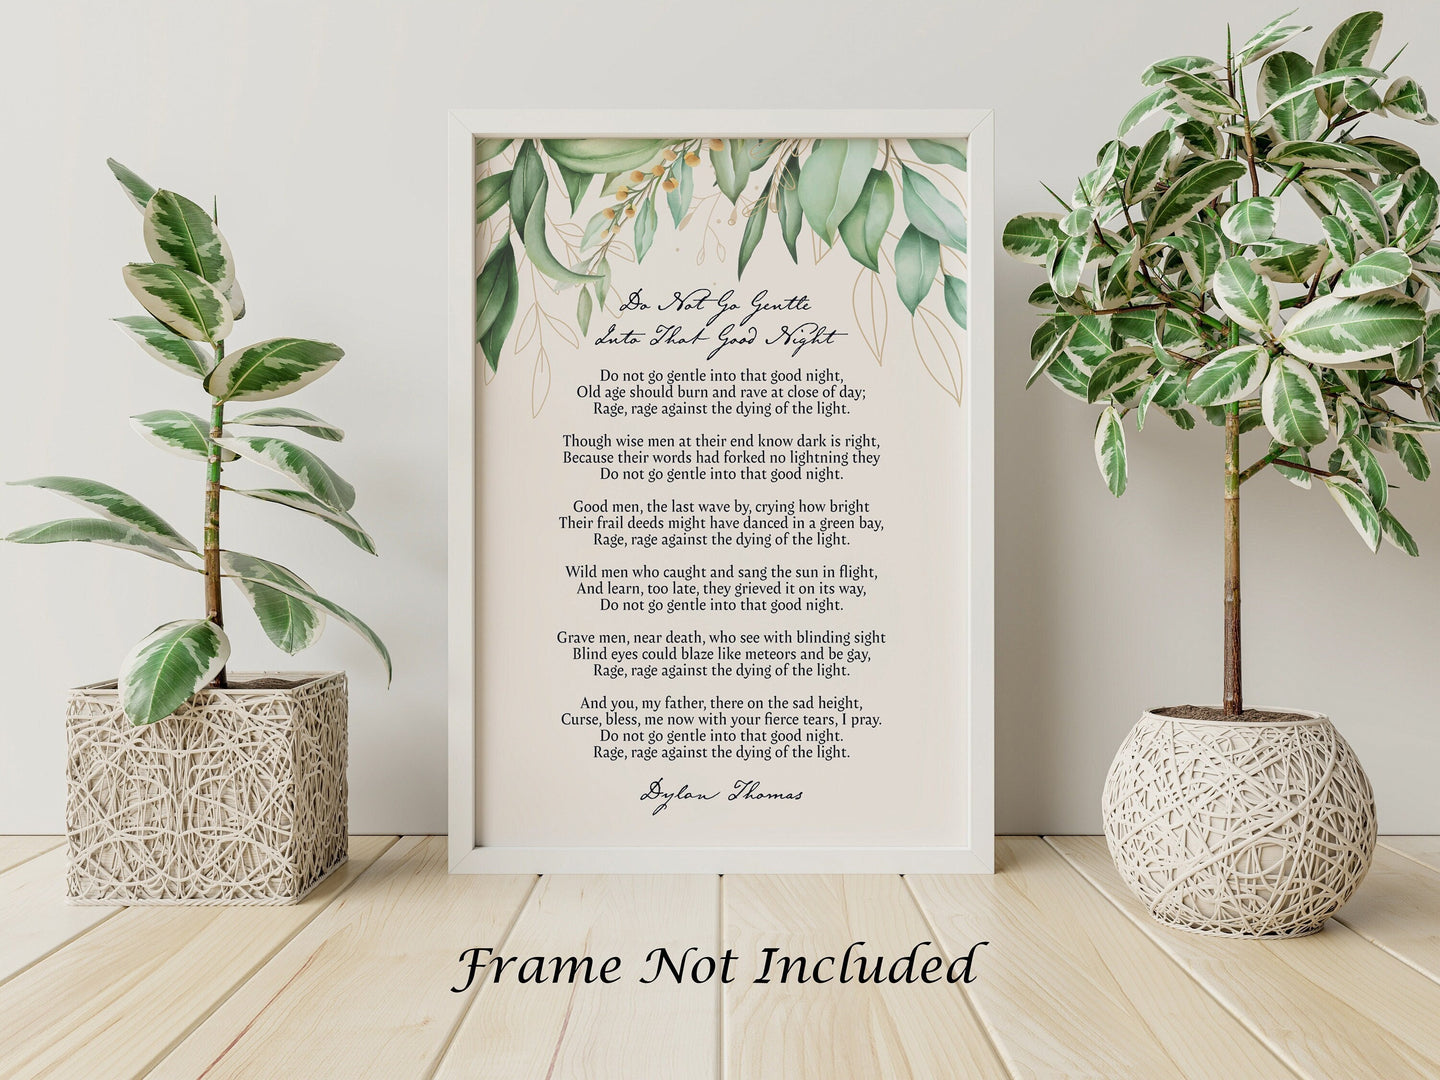 Do not go gentle into that good night - Dylan Thomas Poem Print - Poetry Poster Print - Poem Wall Art - Physical Print Without Frame